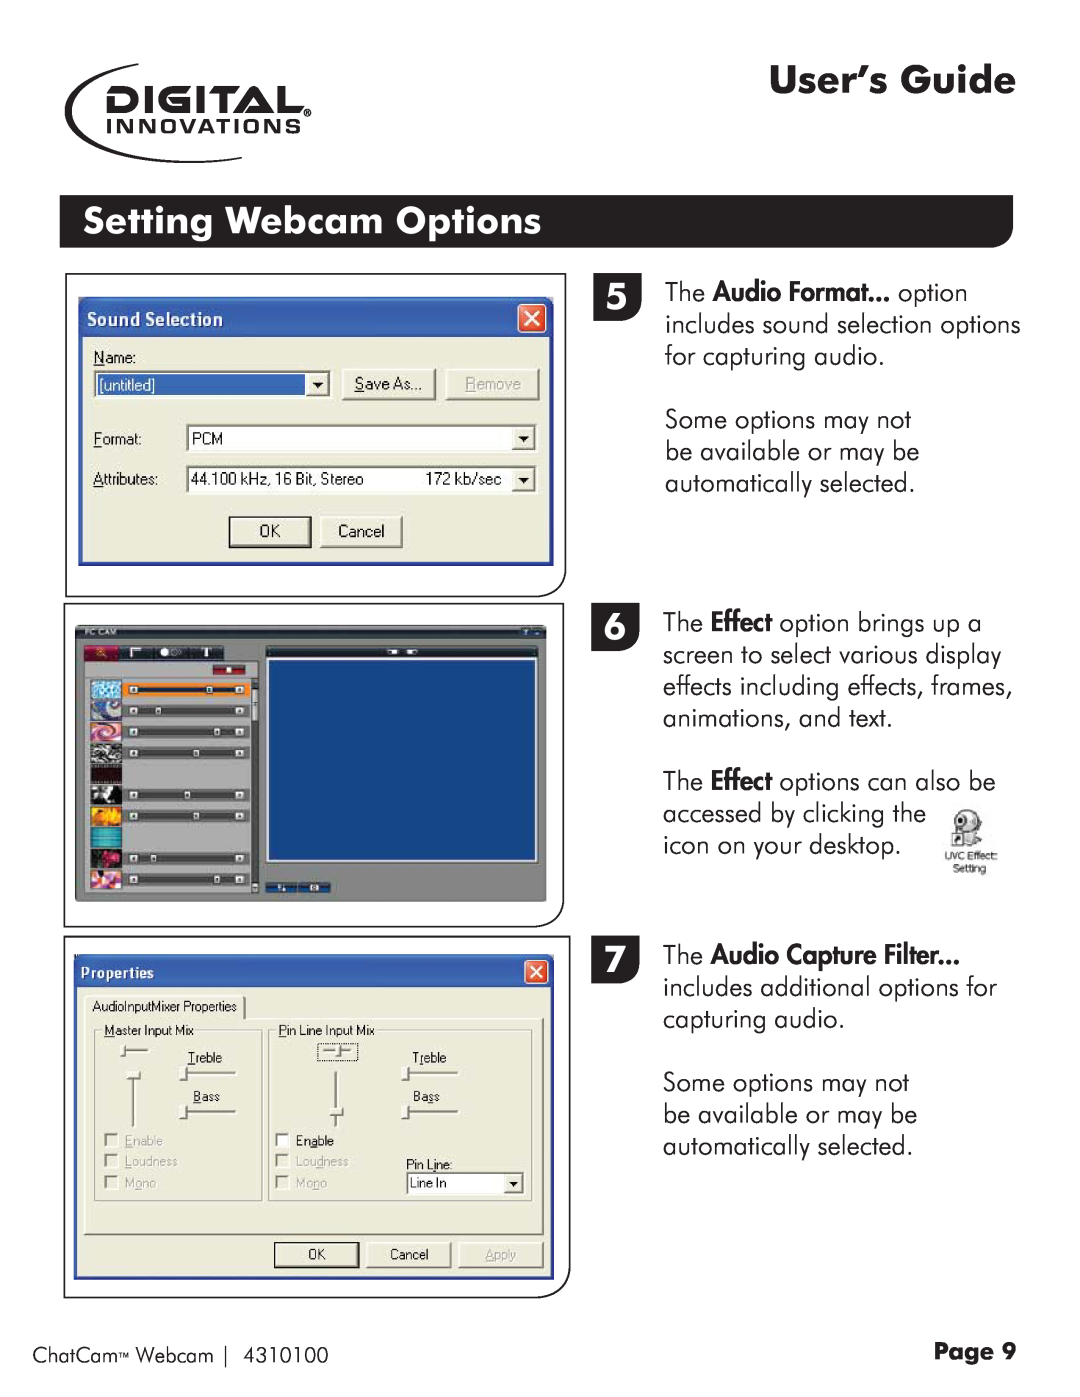 Micro Innovations 4310100 quick start User’s Guide, Setting Webcam Options, The Audio Capture Filter 